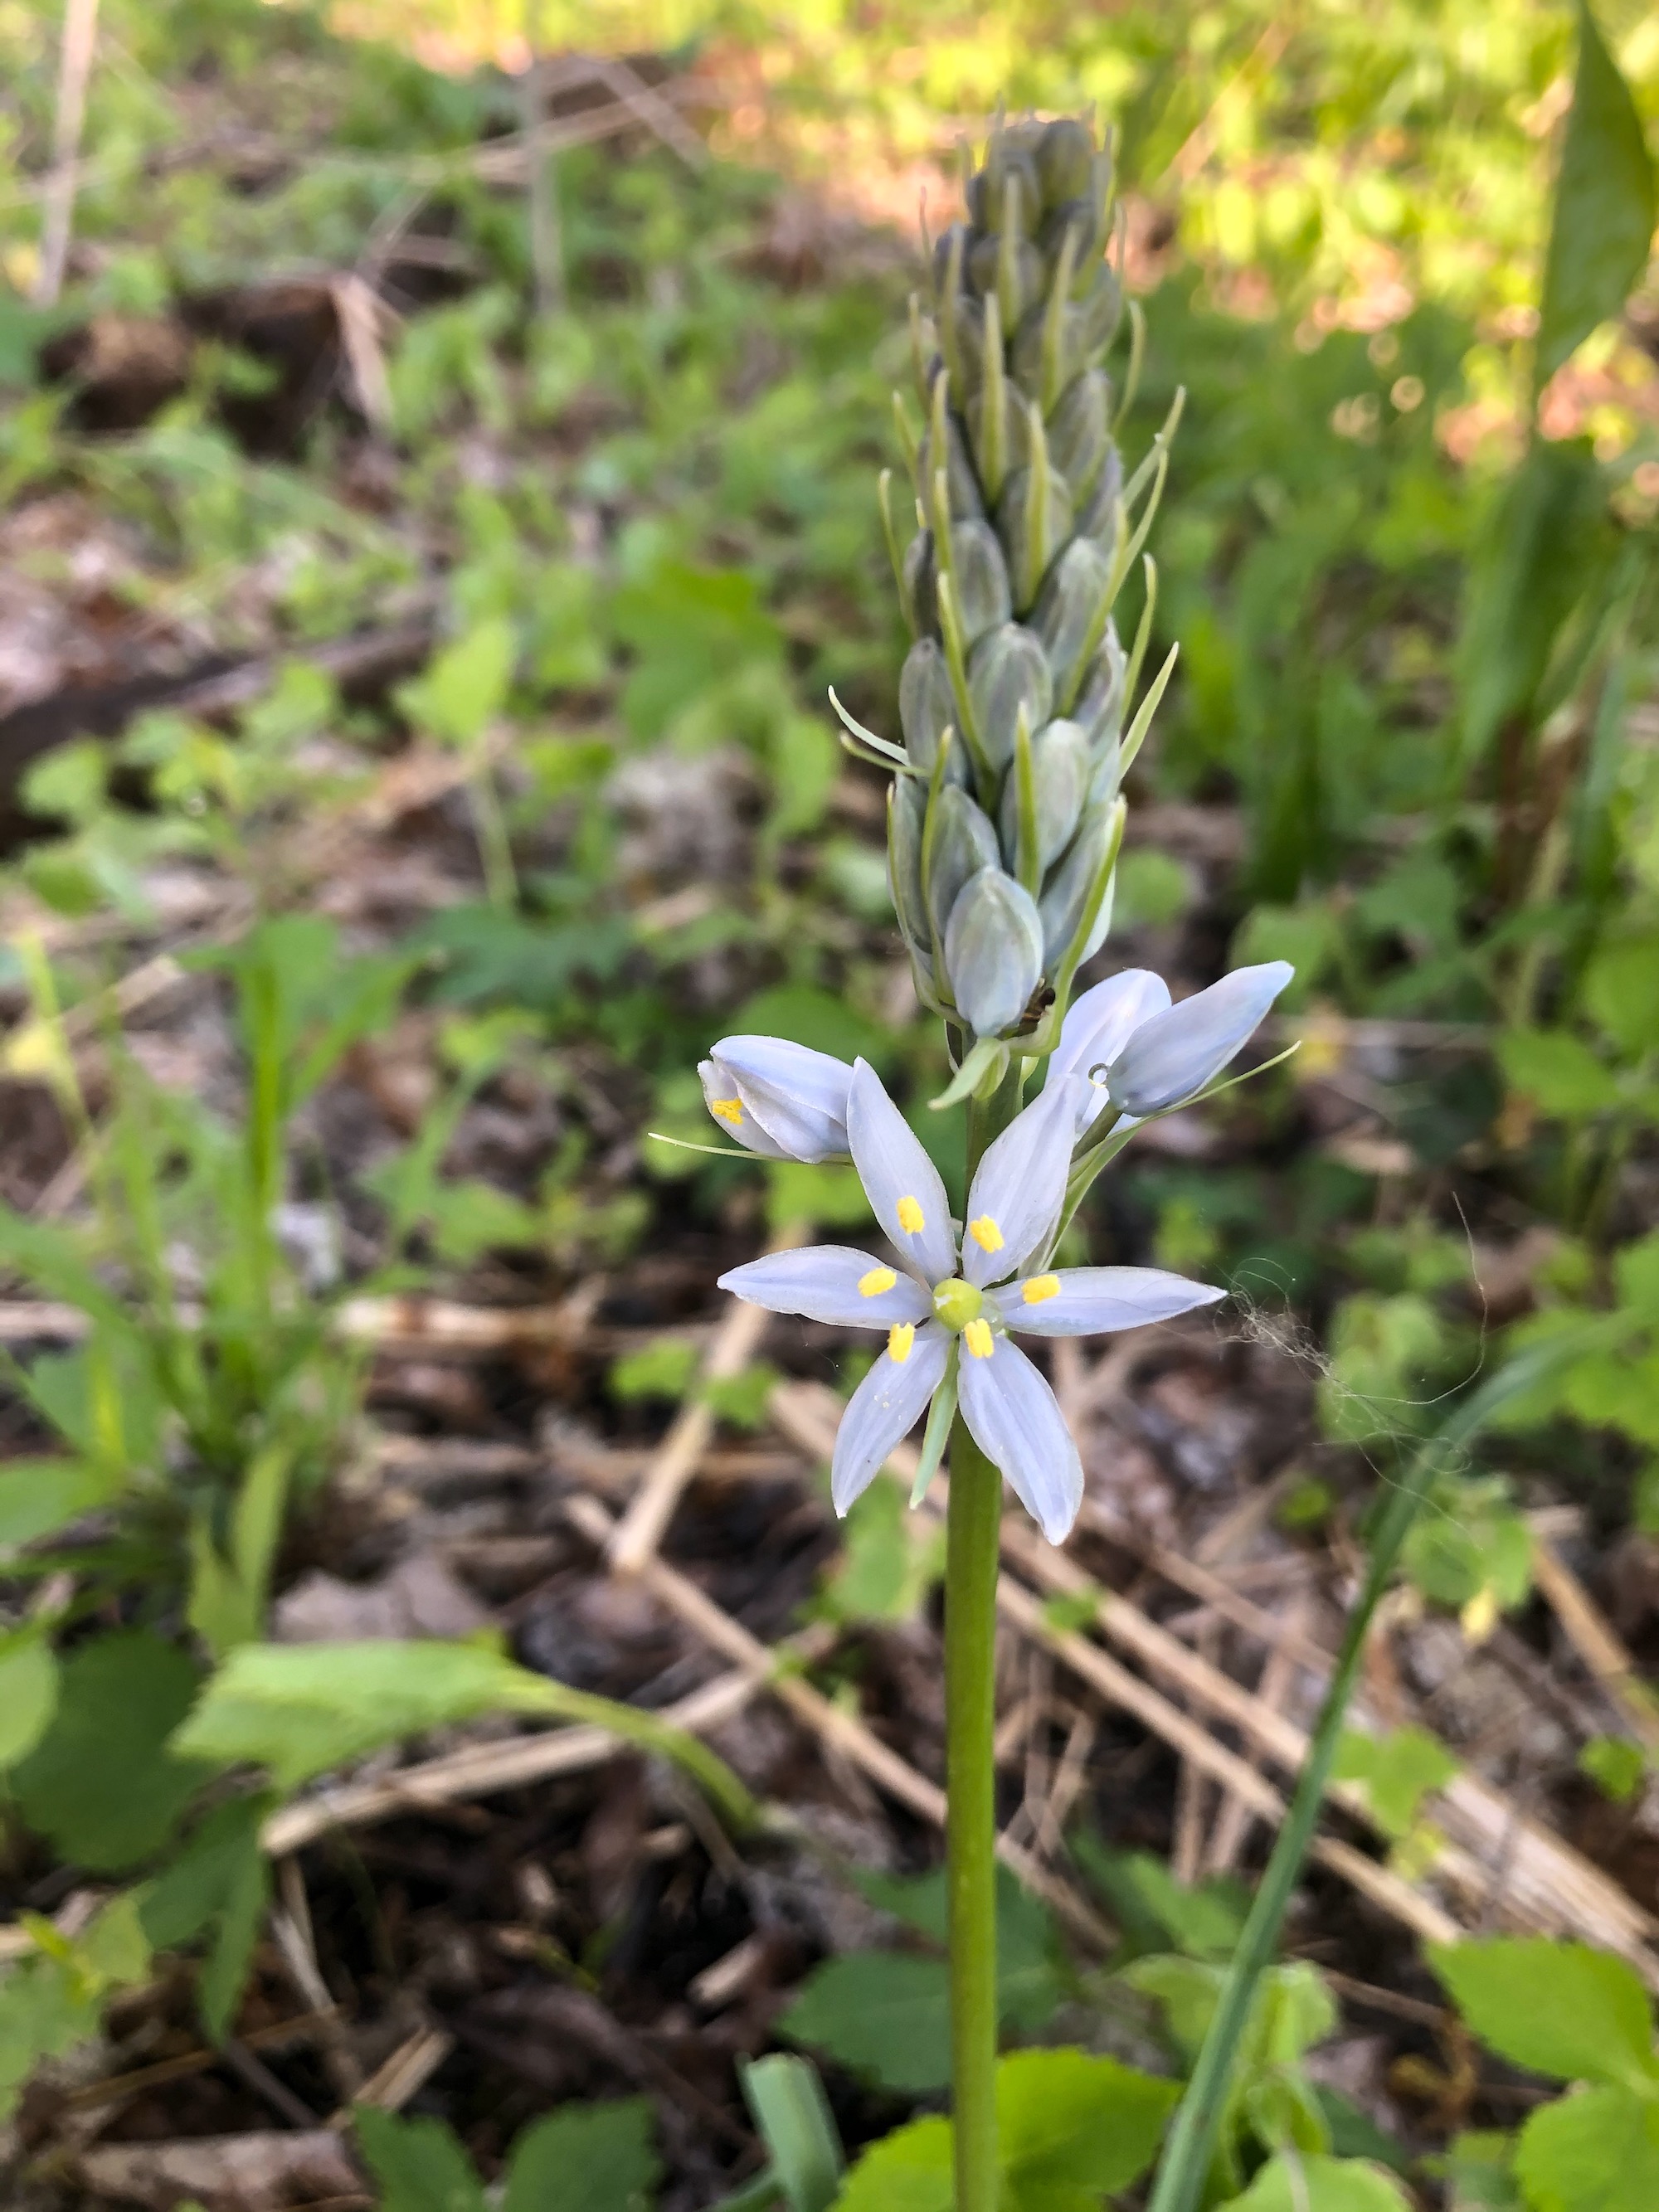 Wild Hyacinth in woods between Marion Dunn and Oak Savanna on May 8, 2021.